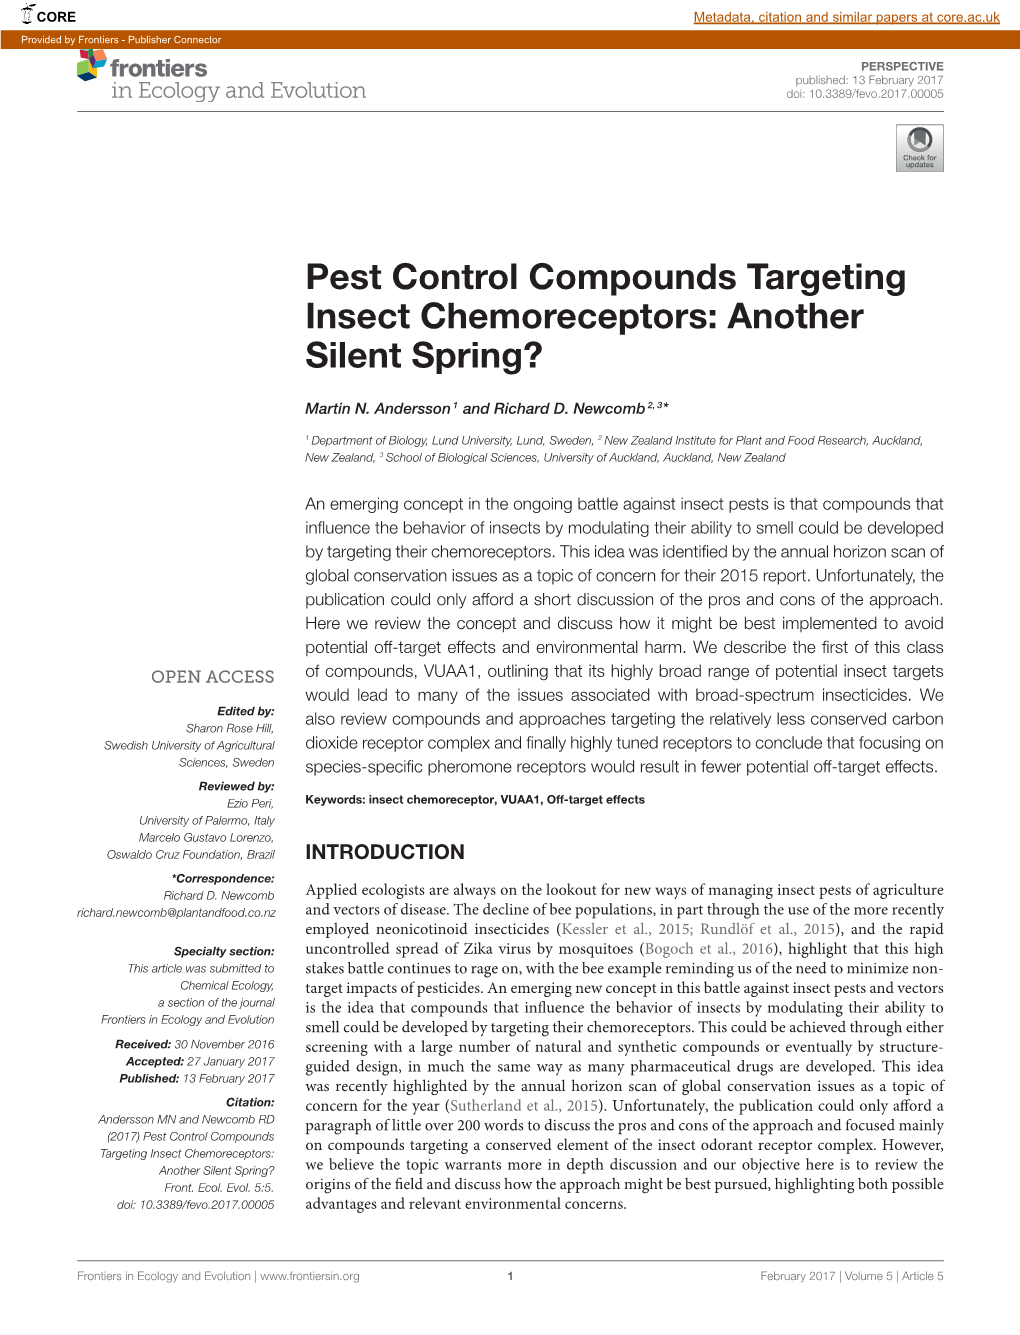 Pest Control Compounds Targeting Insect Chemoreceptors: Another Silent Spring?